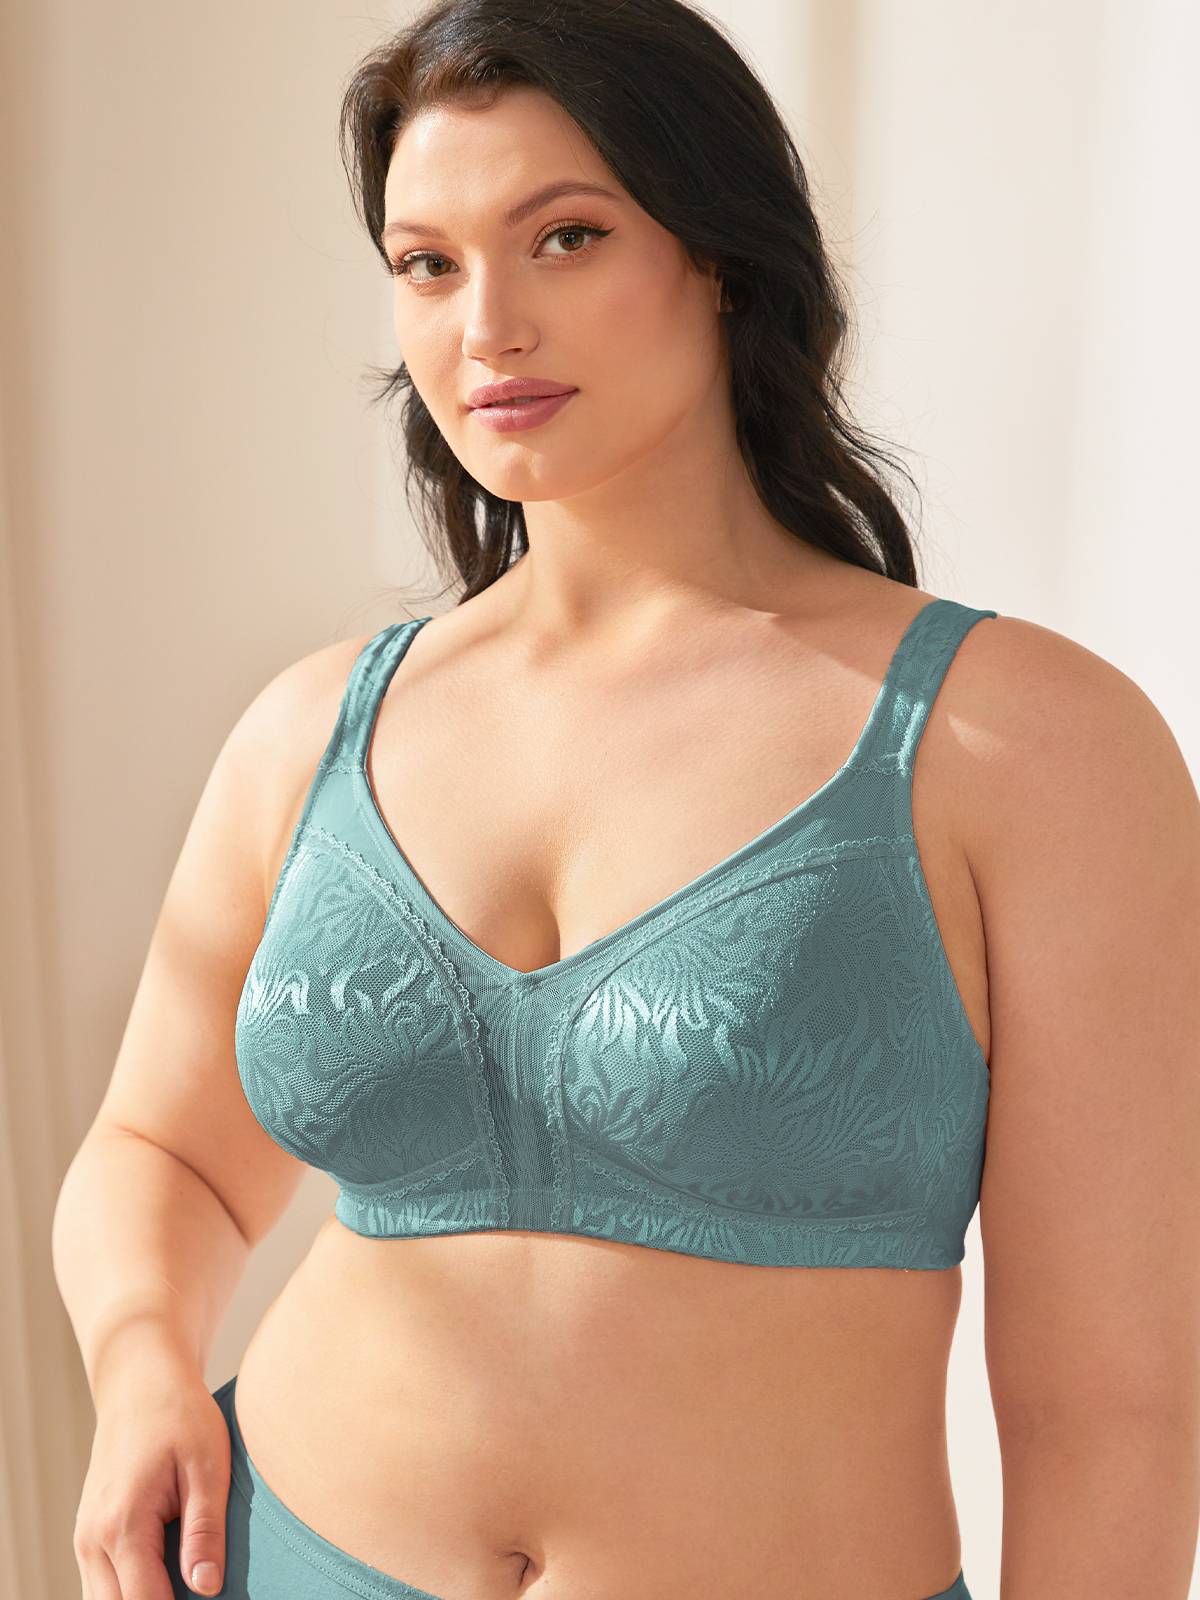  Womens Plus Size Bras Minimizer Underwire Full Coverage  Unlined Seamless Cup Light Green Heather 36G